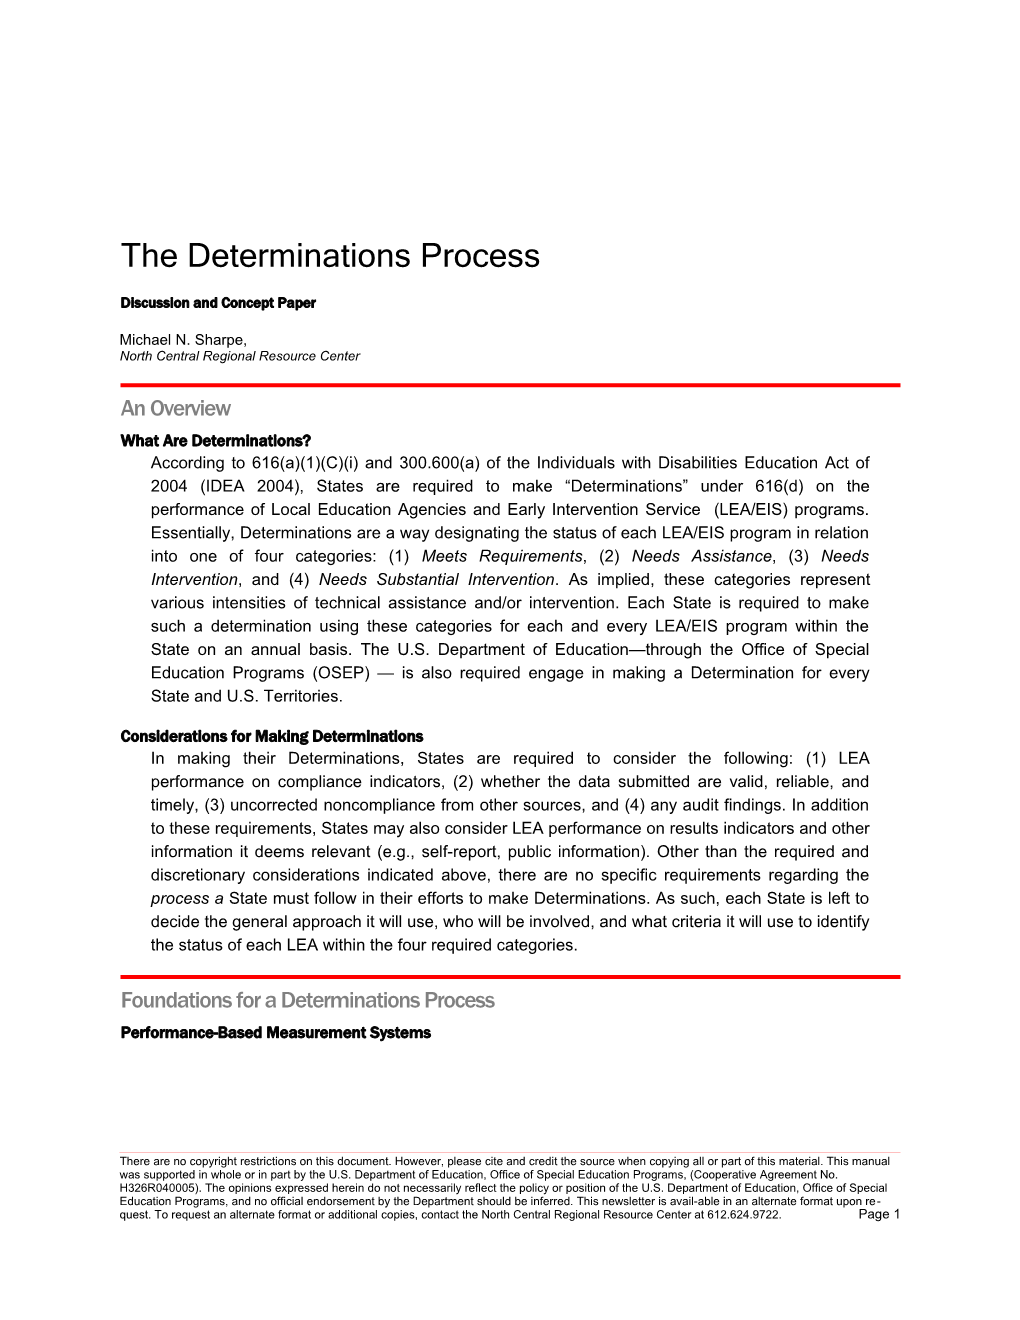 The Determinations Process